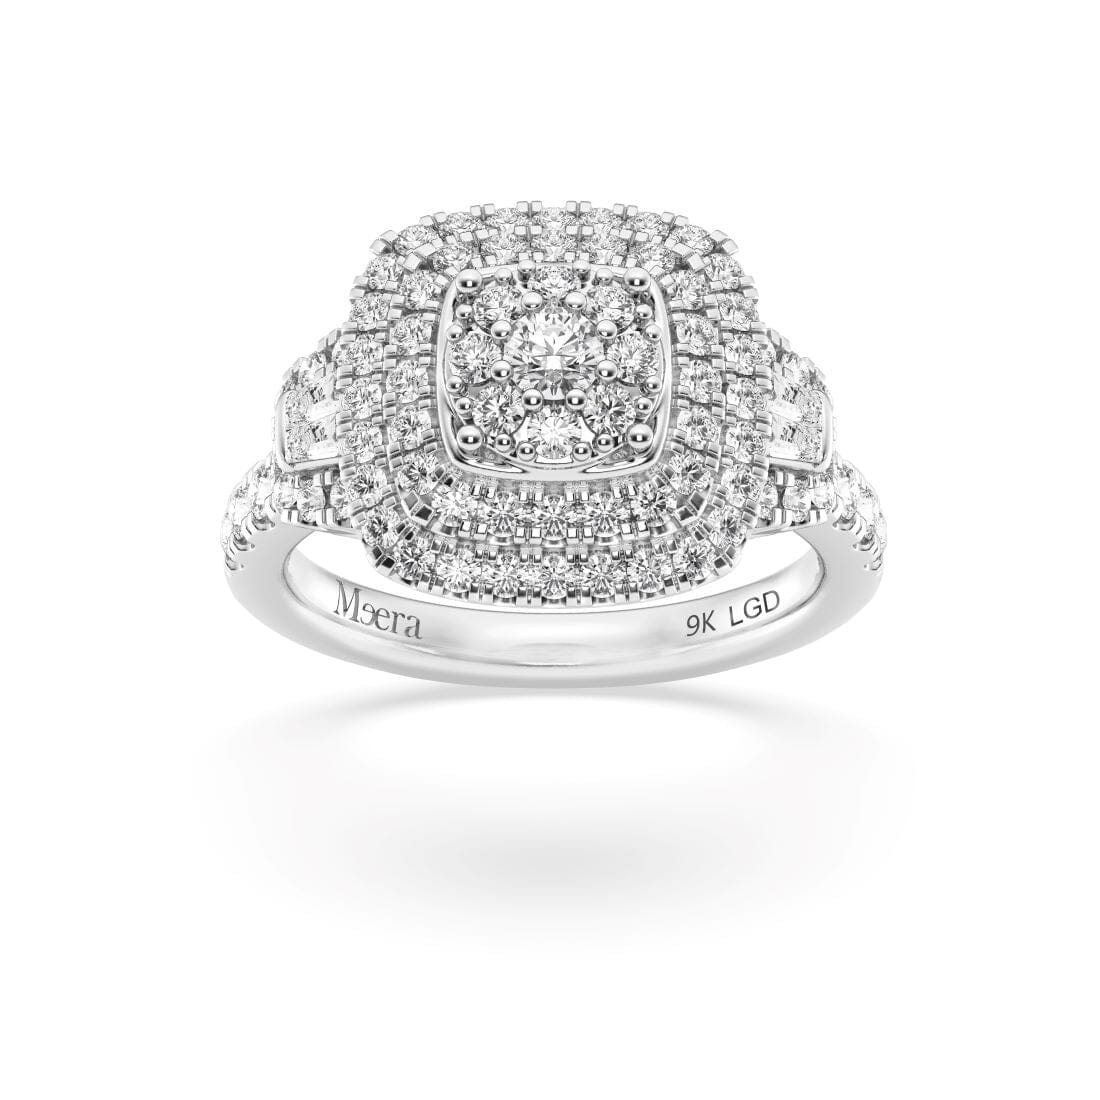 Meera Double Halo Ring with 1.00ct of Laboratory Grown Diamonds in 9ct White Gold Rings Bevilles 